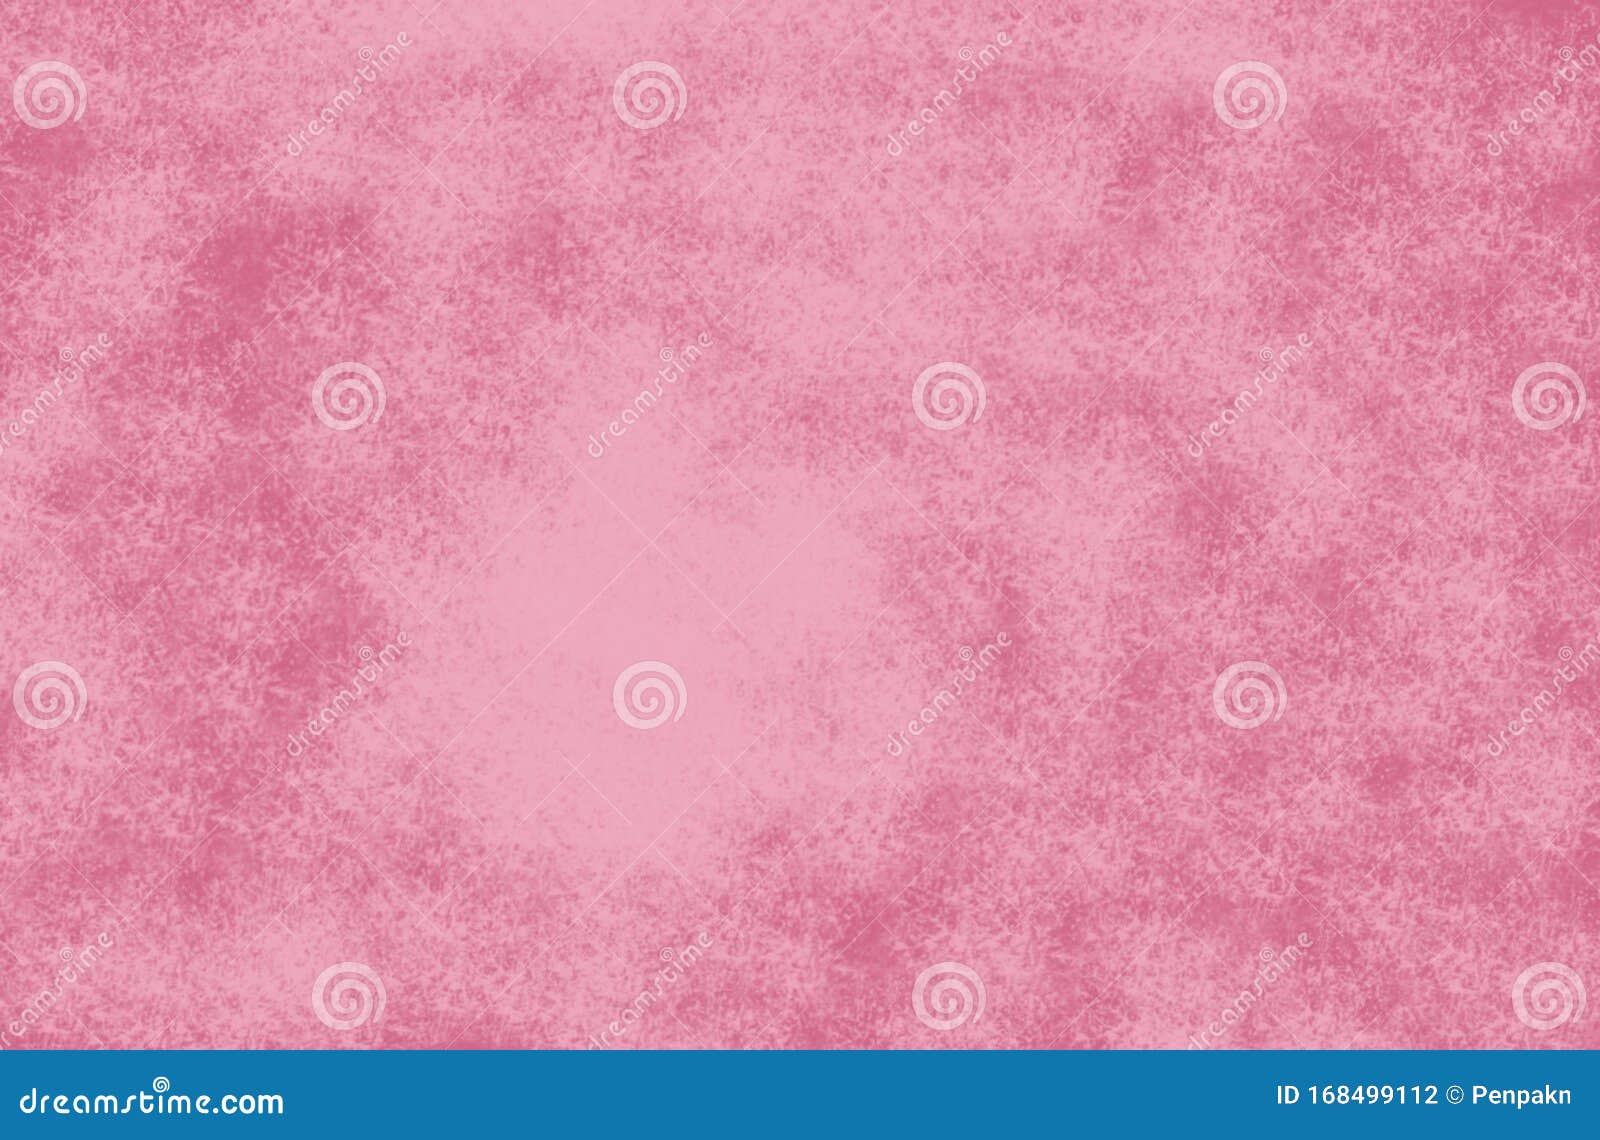 The Distribution of Color and Abstract Background Pink Tone Color ...